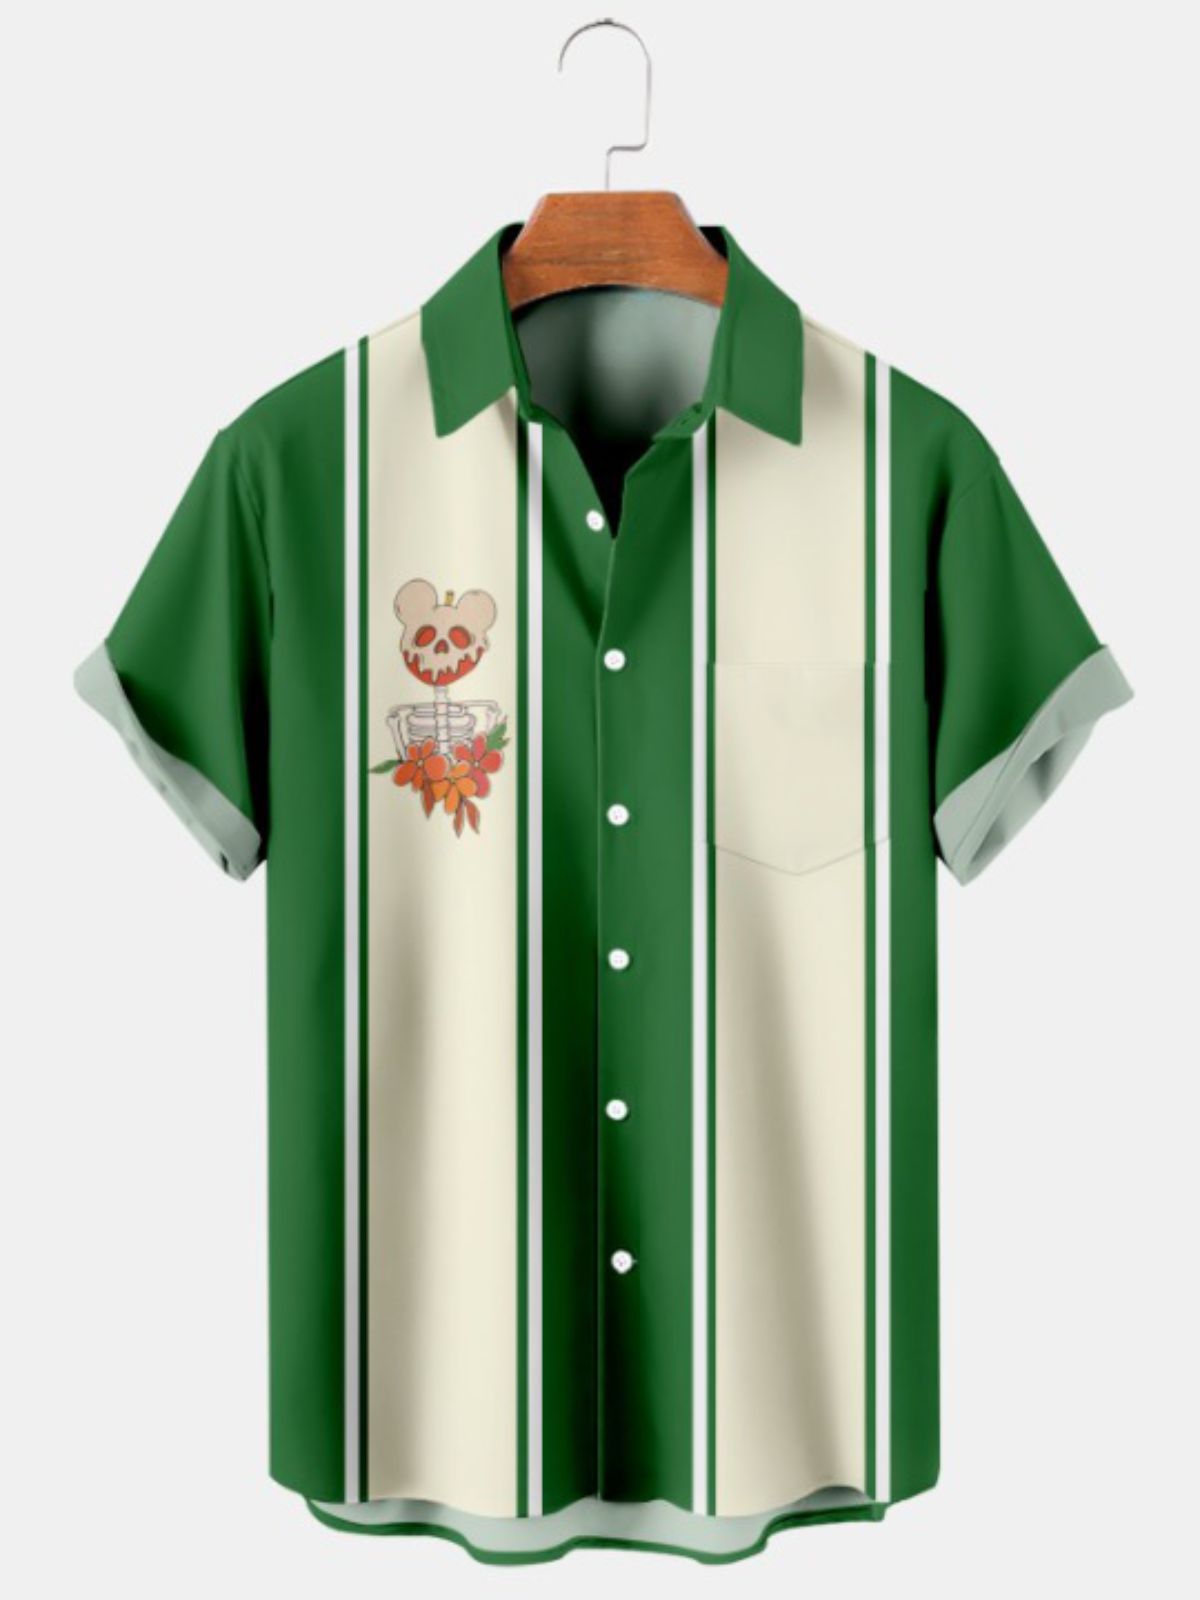 Bowling Shirt With Apple Print For Halloween